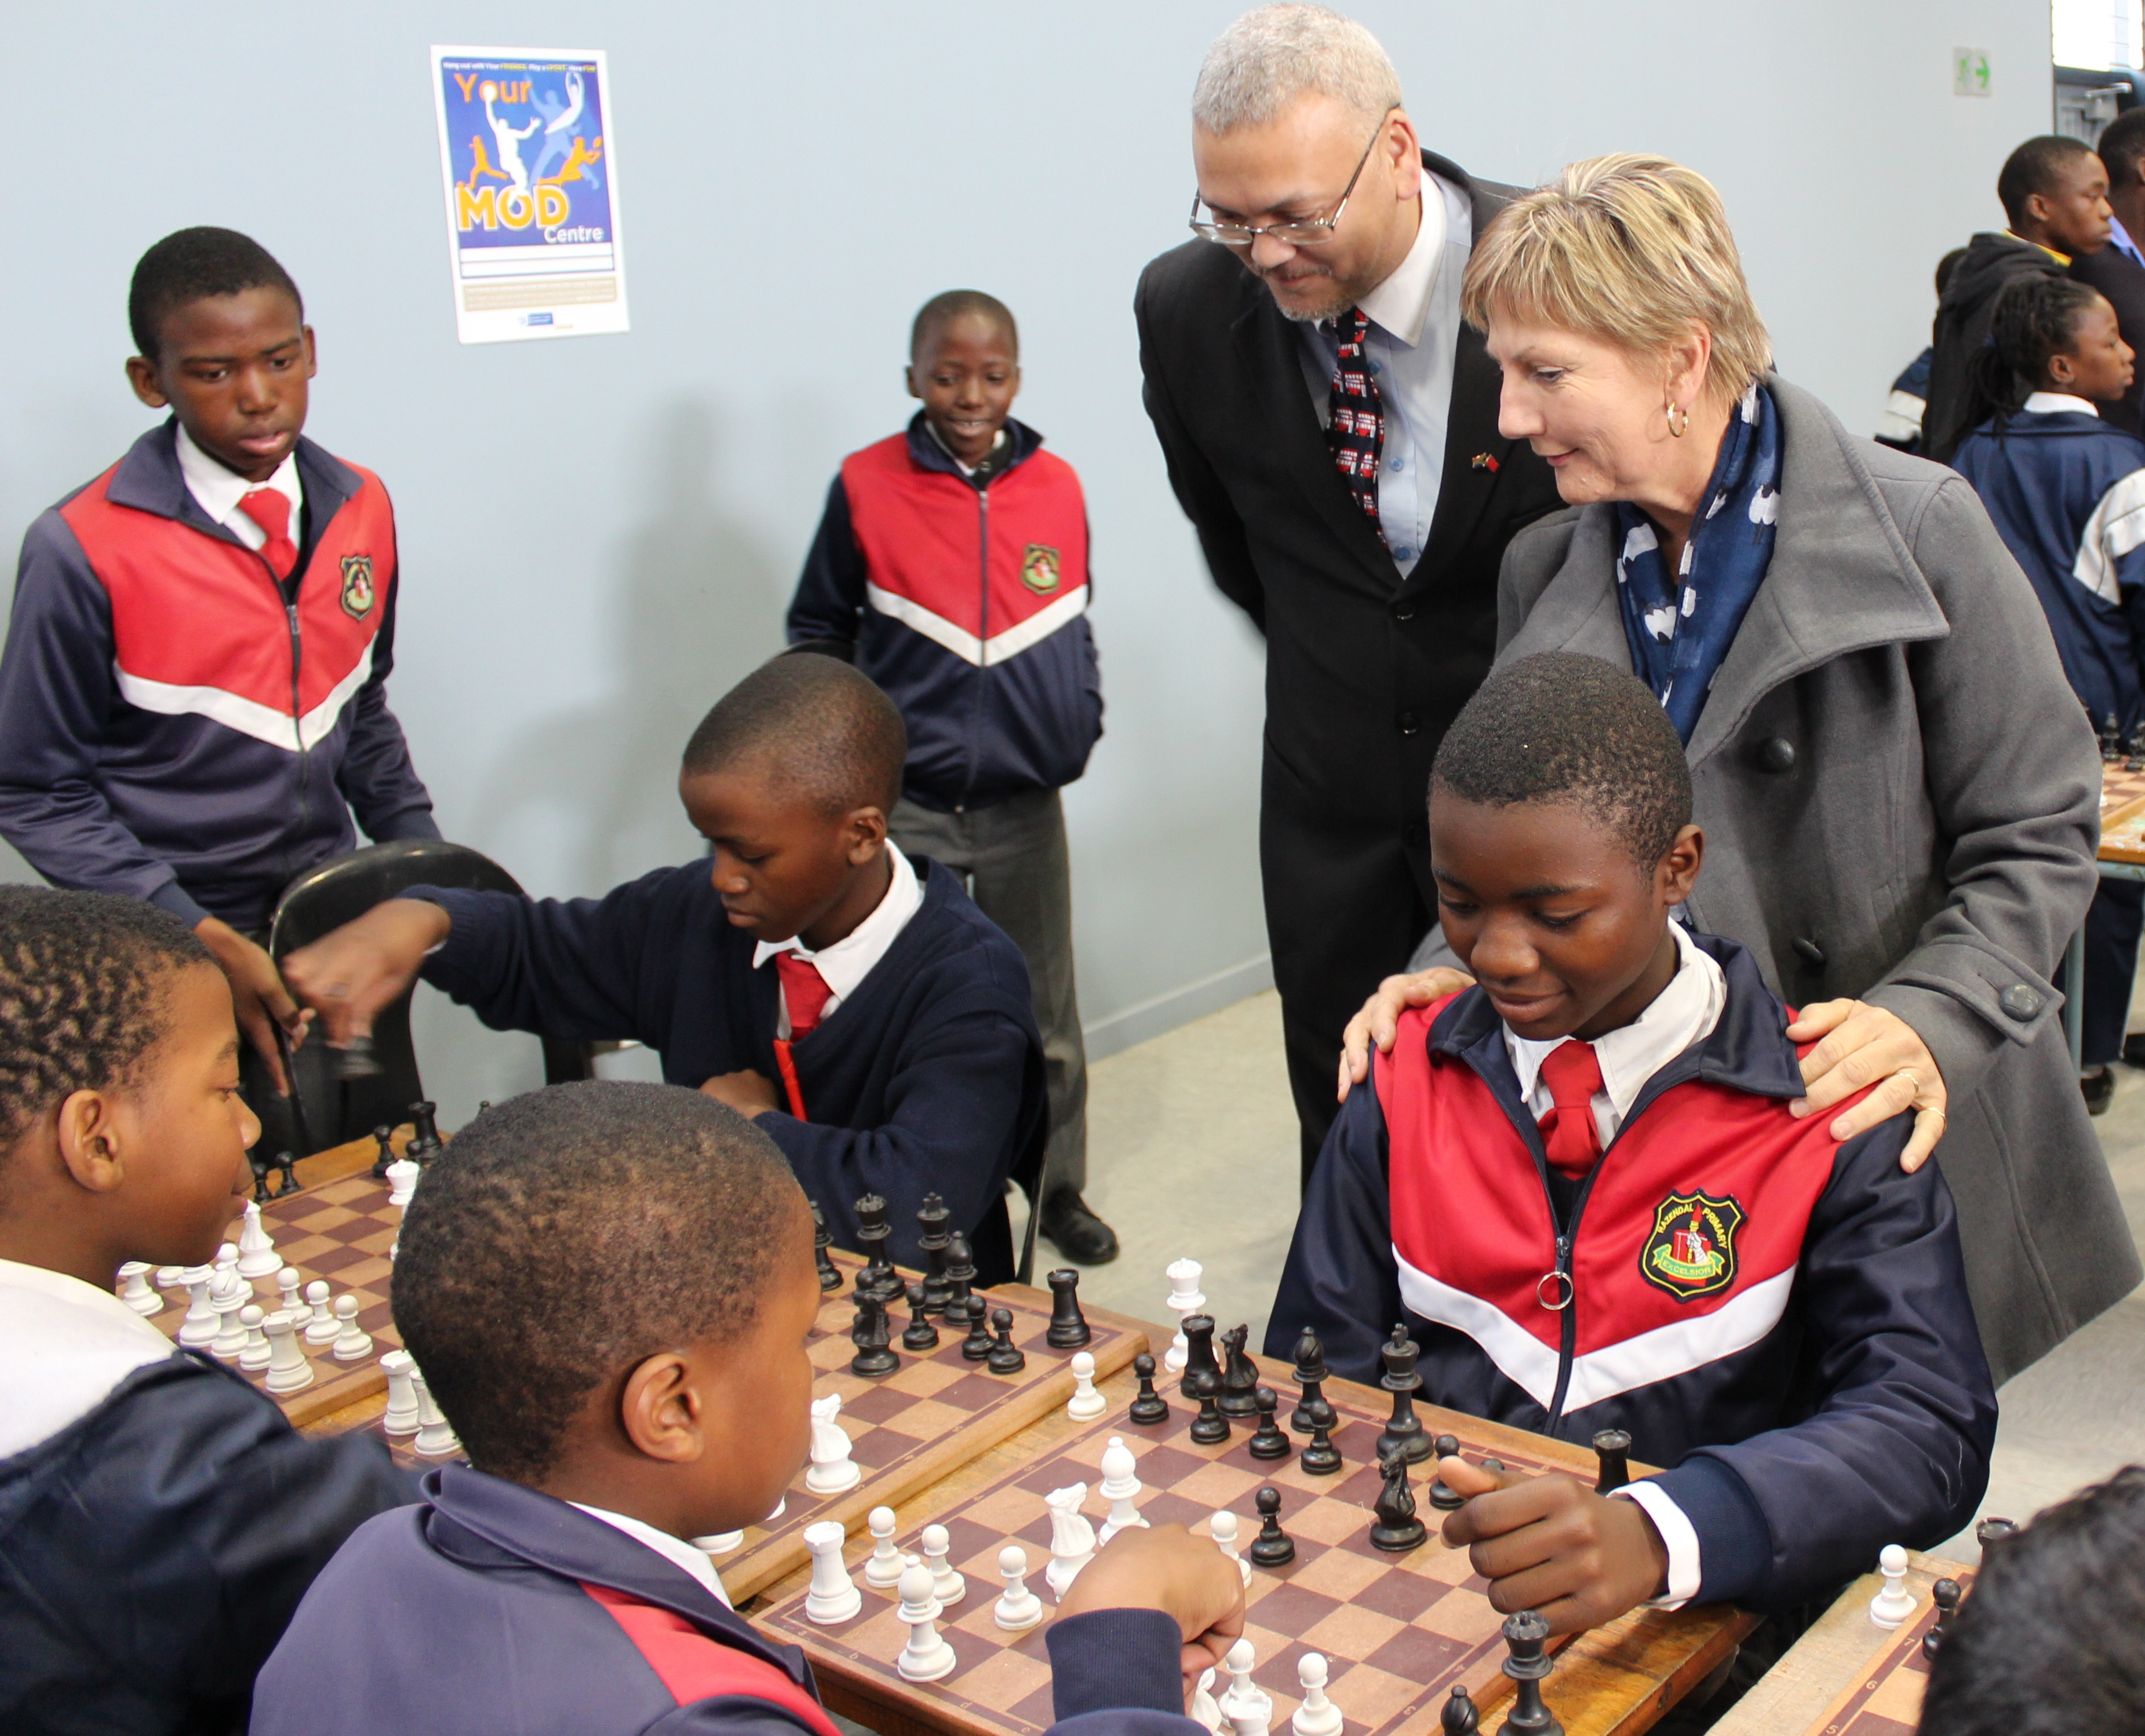 Adv. Lyndon Bouah and Minister Anroux Marais observing the young players from Hazendal Primary School.